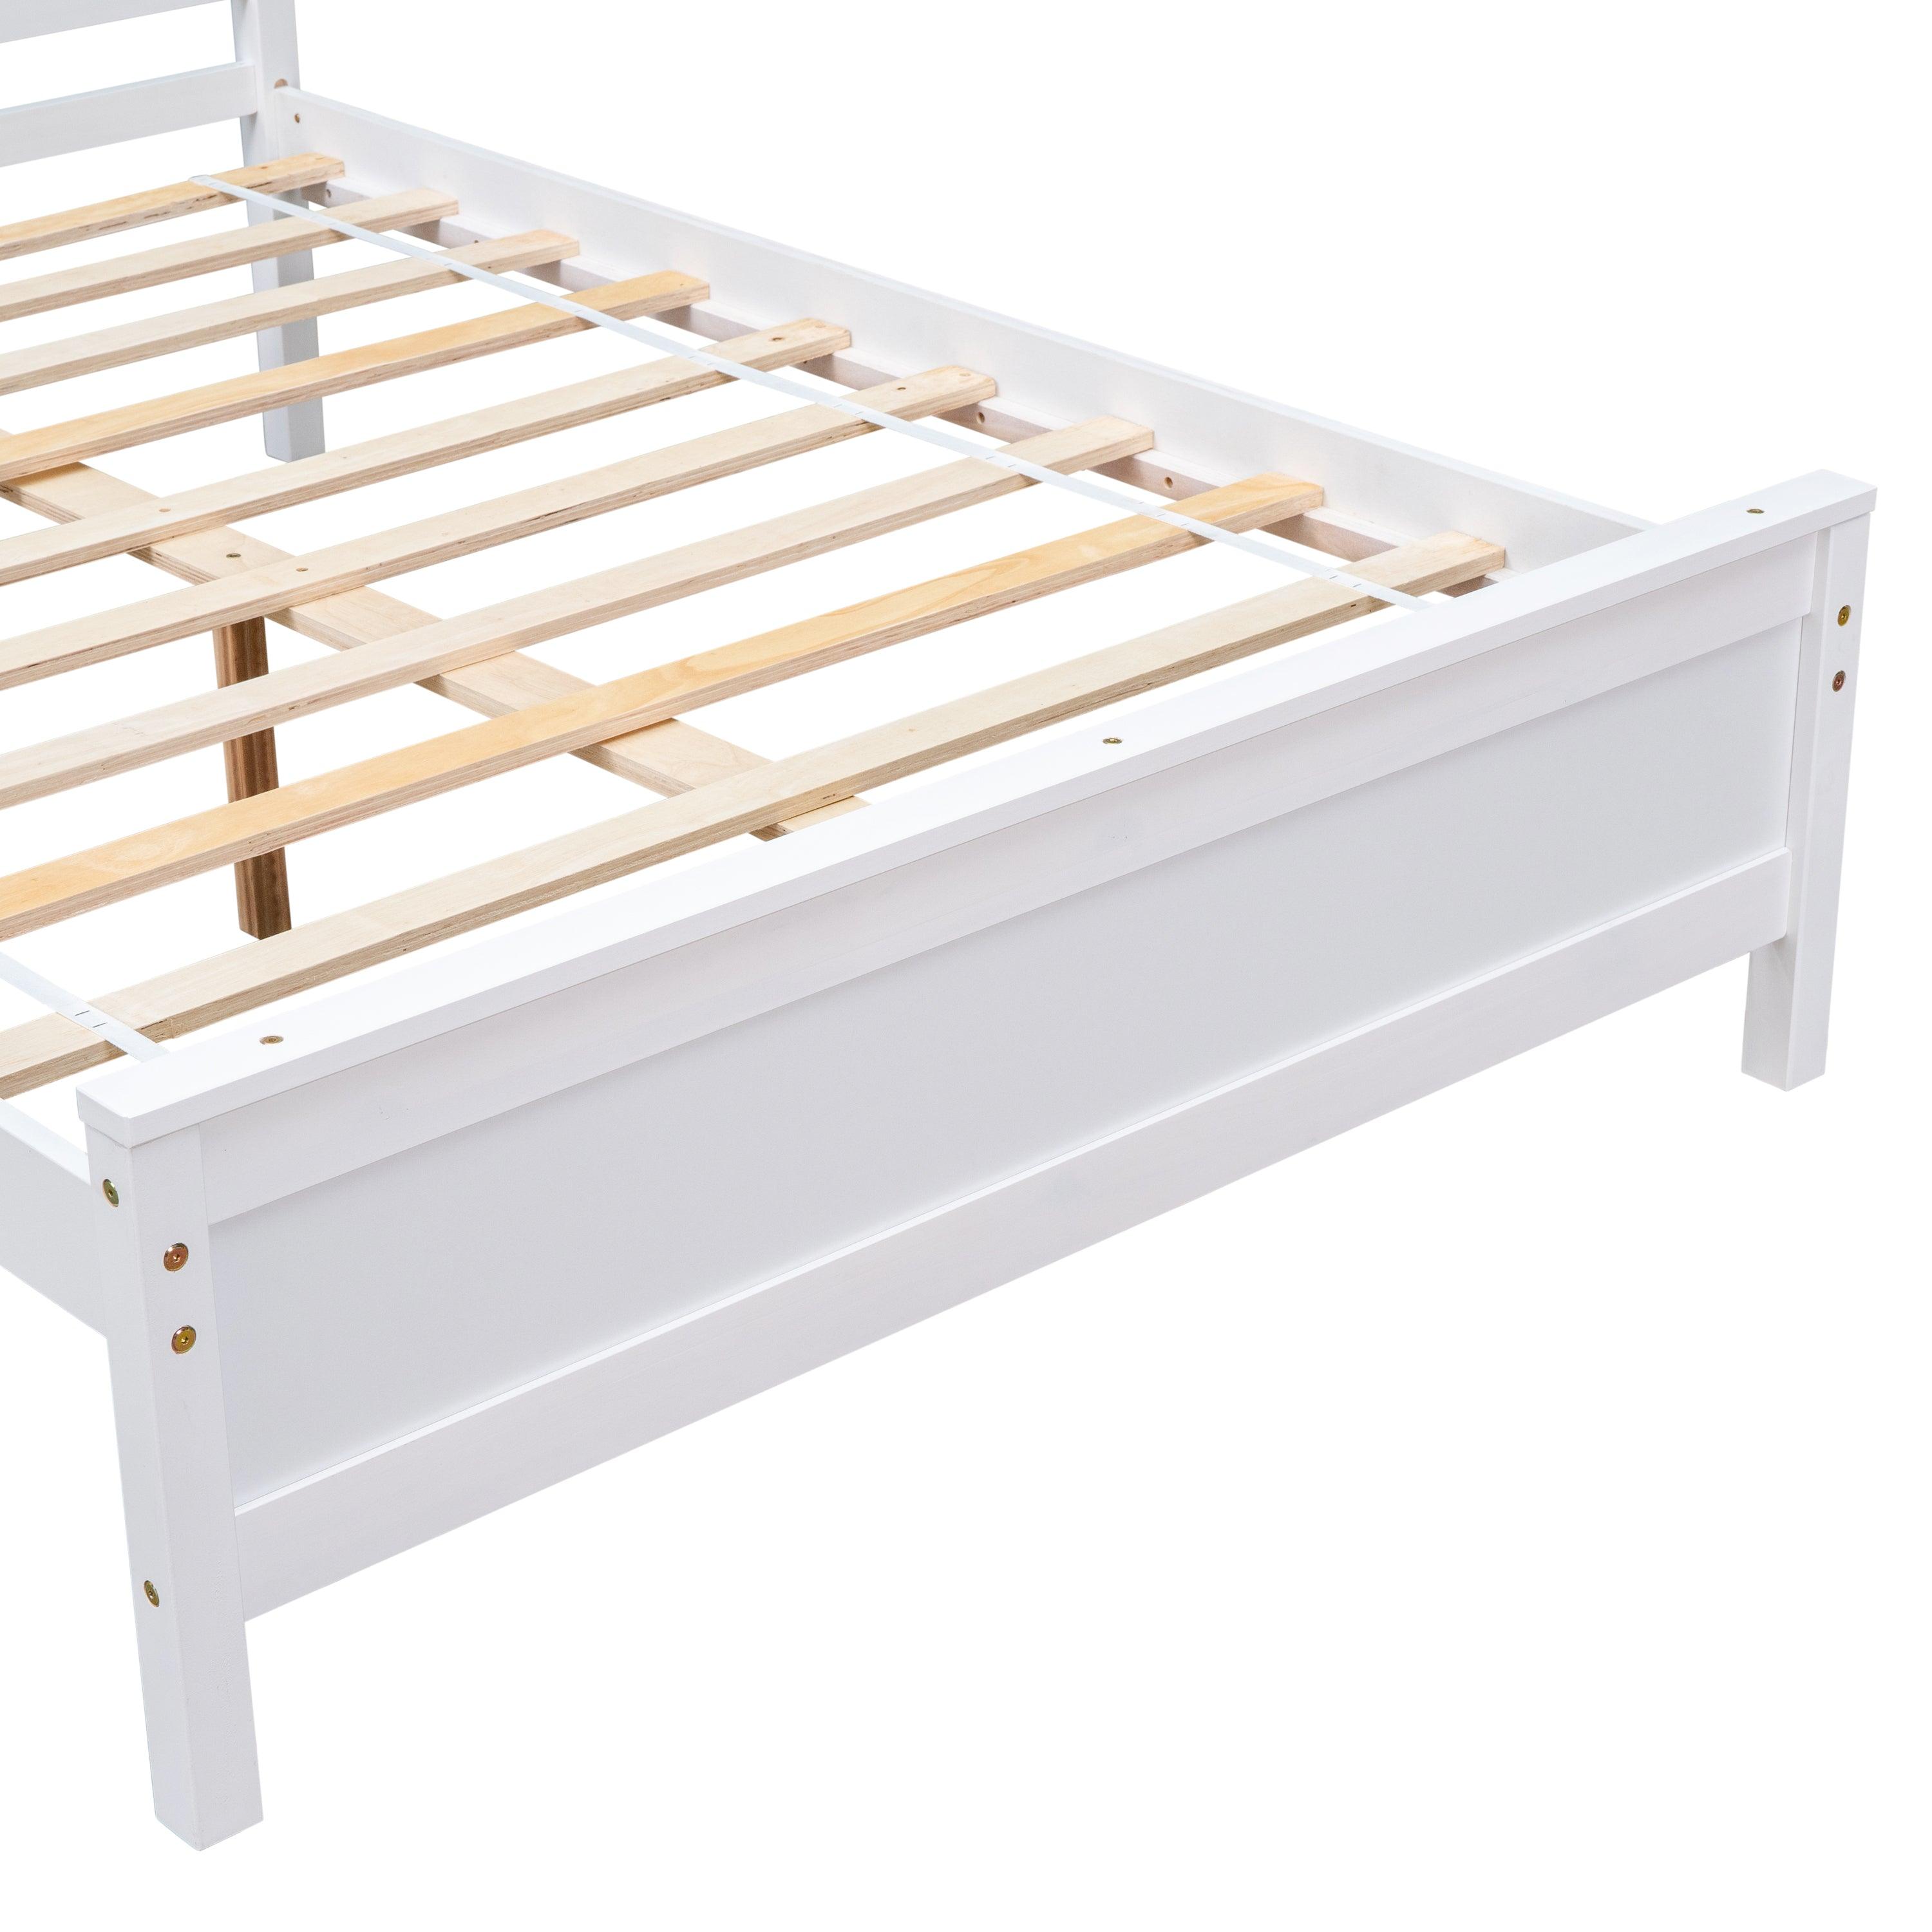 Full Bed With Headboard, Footboard And Nightstand, For Kids, Teens & Adults, White